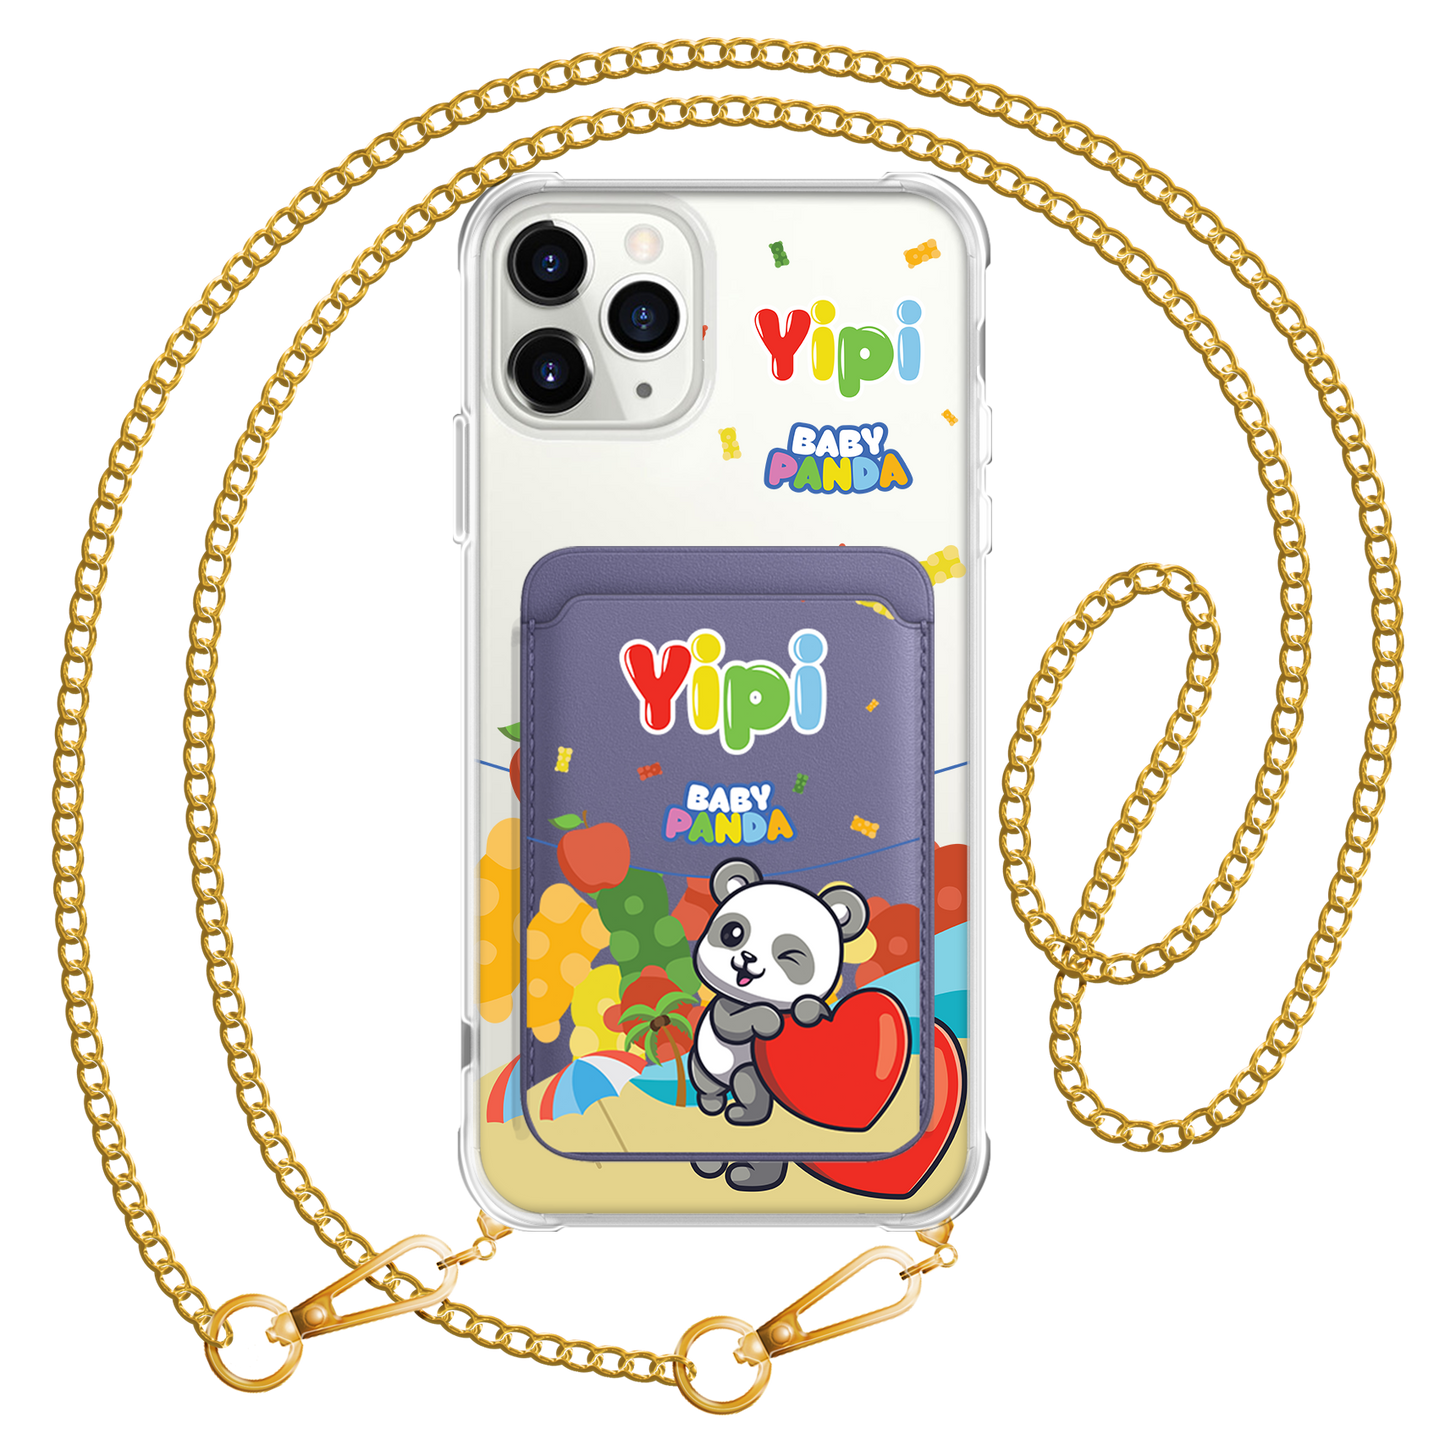 iPhone Magnetic Wallet Case - Yipi Baby Panda